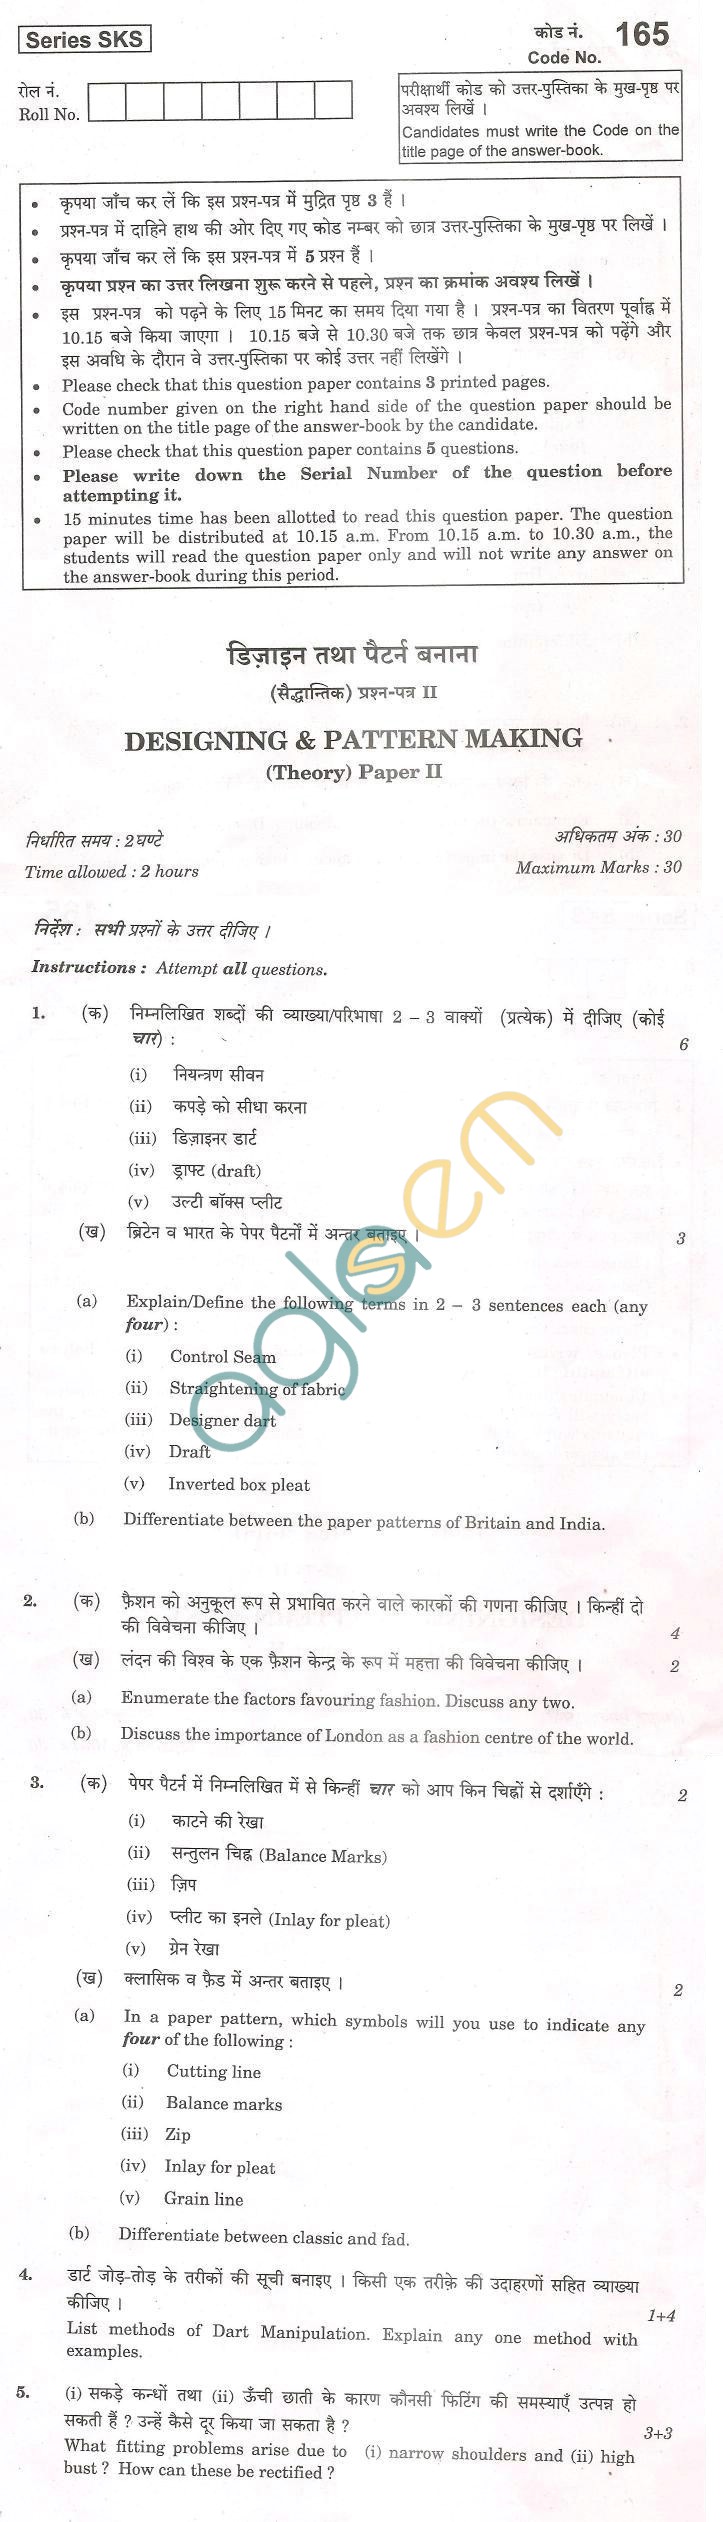 CBSE Board Exam 2013 Class XII Question Paper - Designing & Pattern Marking